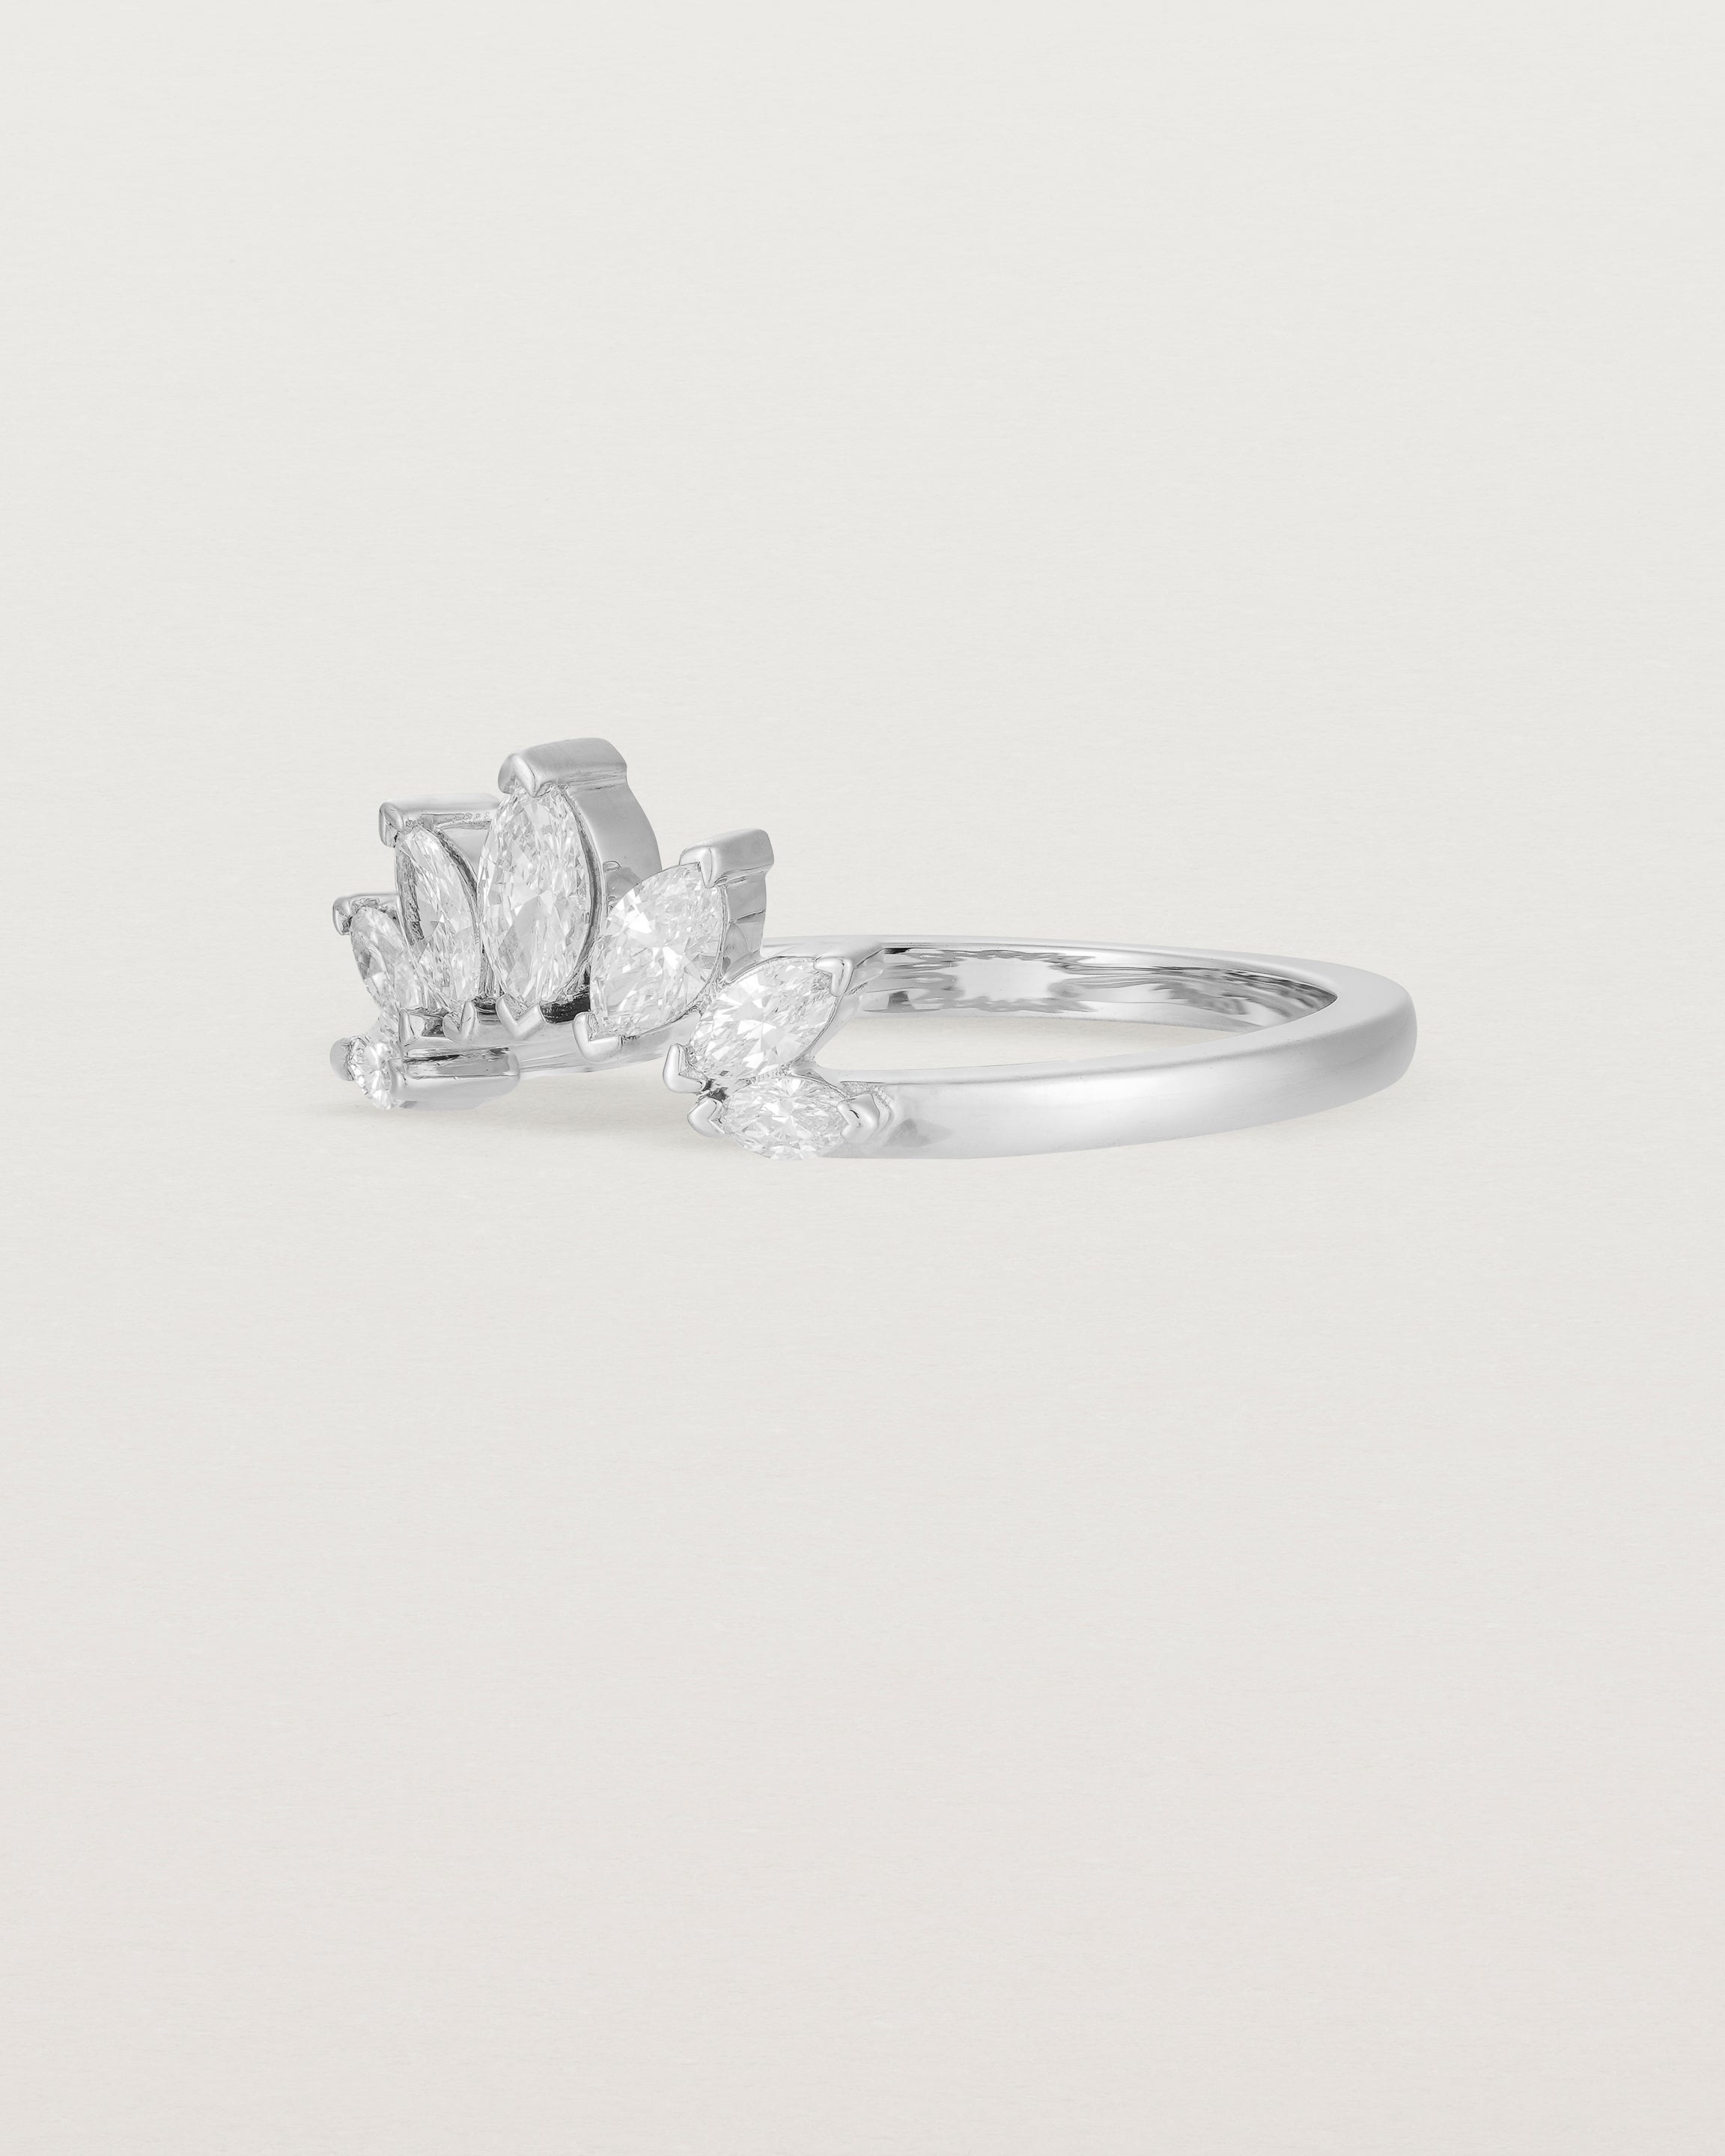 A white diamond, sun-beam inspired crown ring crafted in white gold